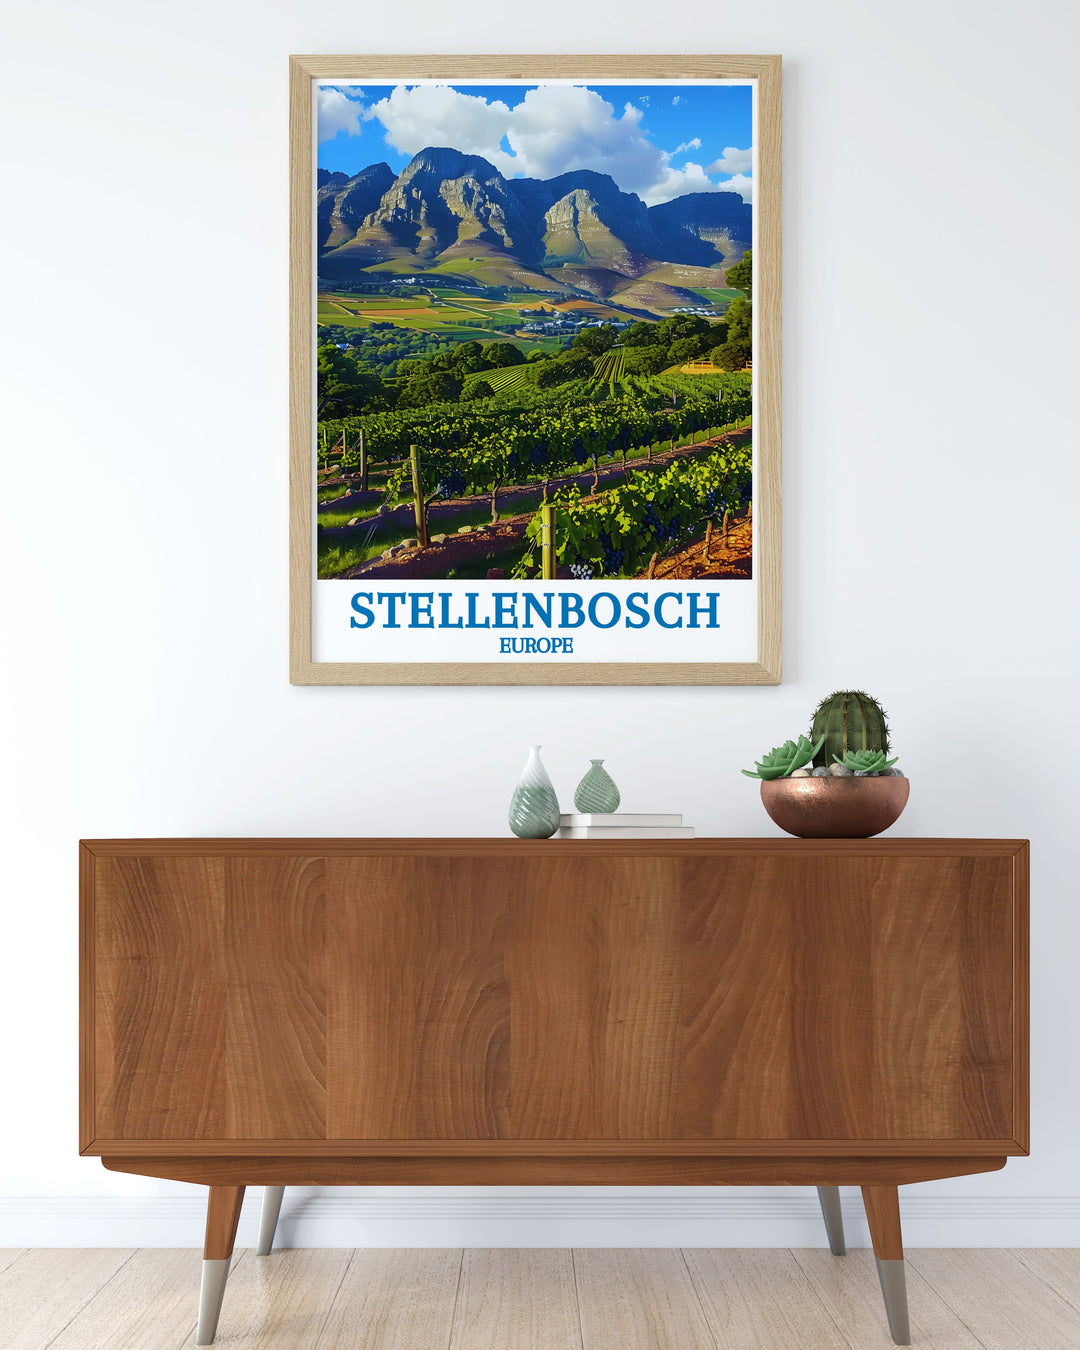 Discover the picturesque landscape of the Stellenbosch Wine Route with this exquisite travel poster, illustrating the rolling vineyards and Cape Dutch architecture.